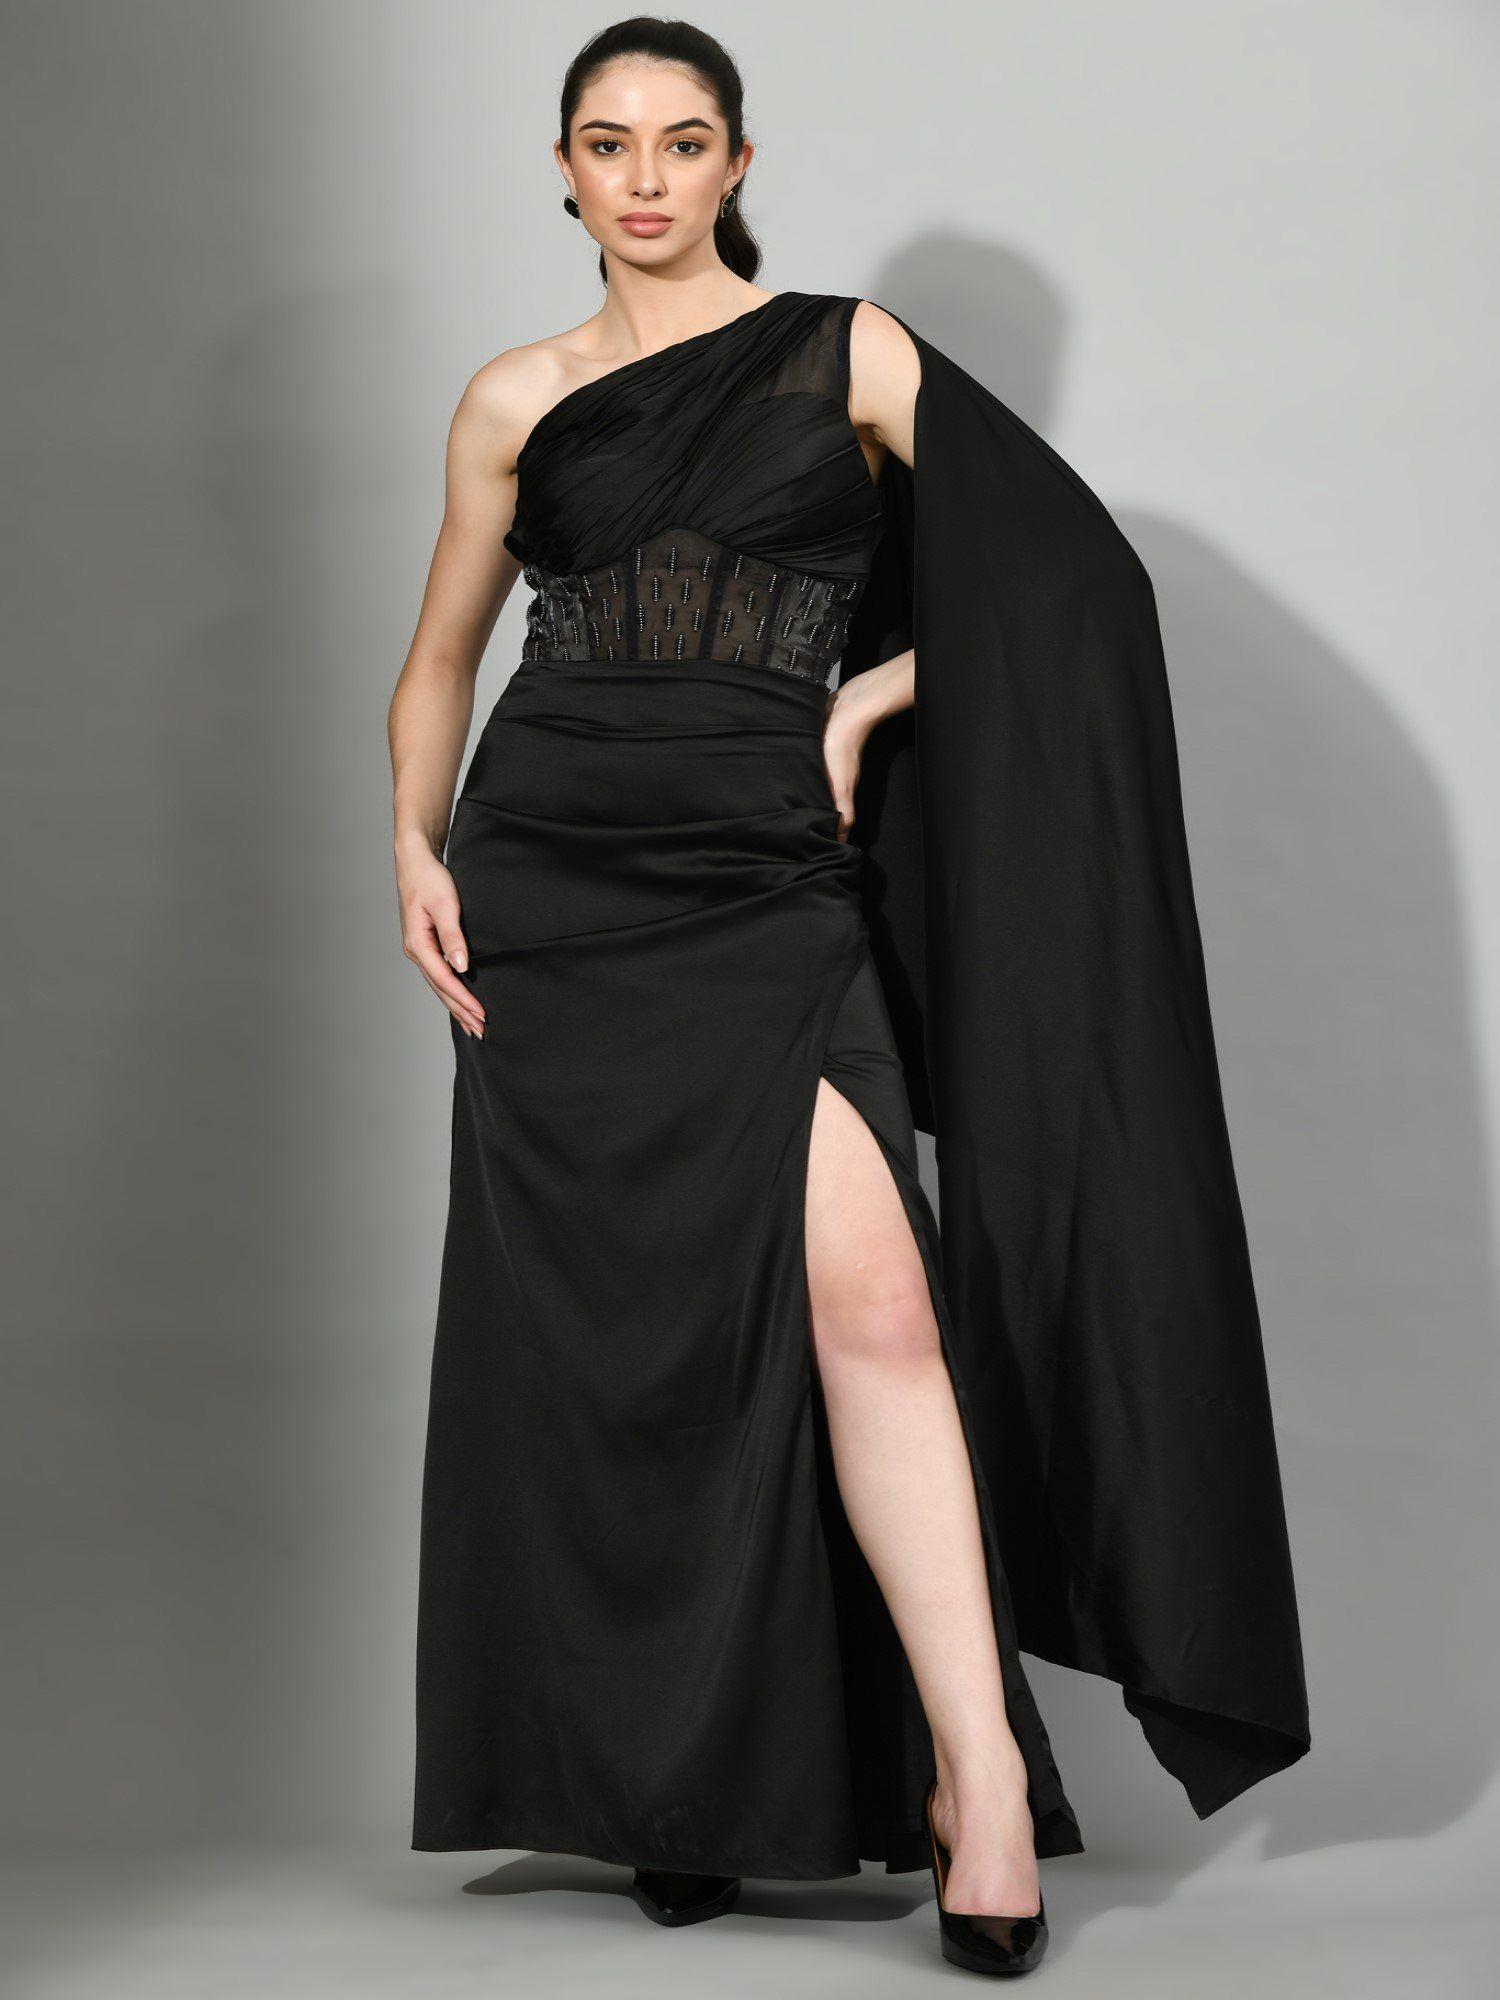 lady in black - corset black gown with beads sequined